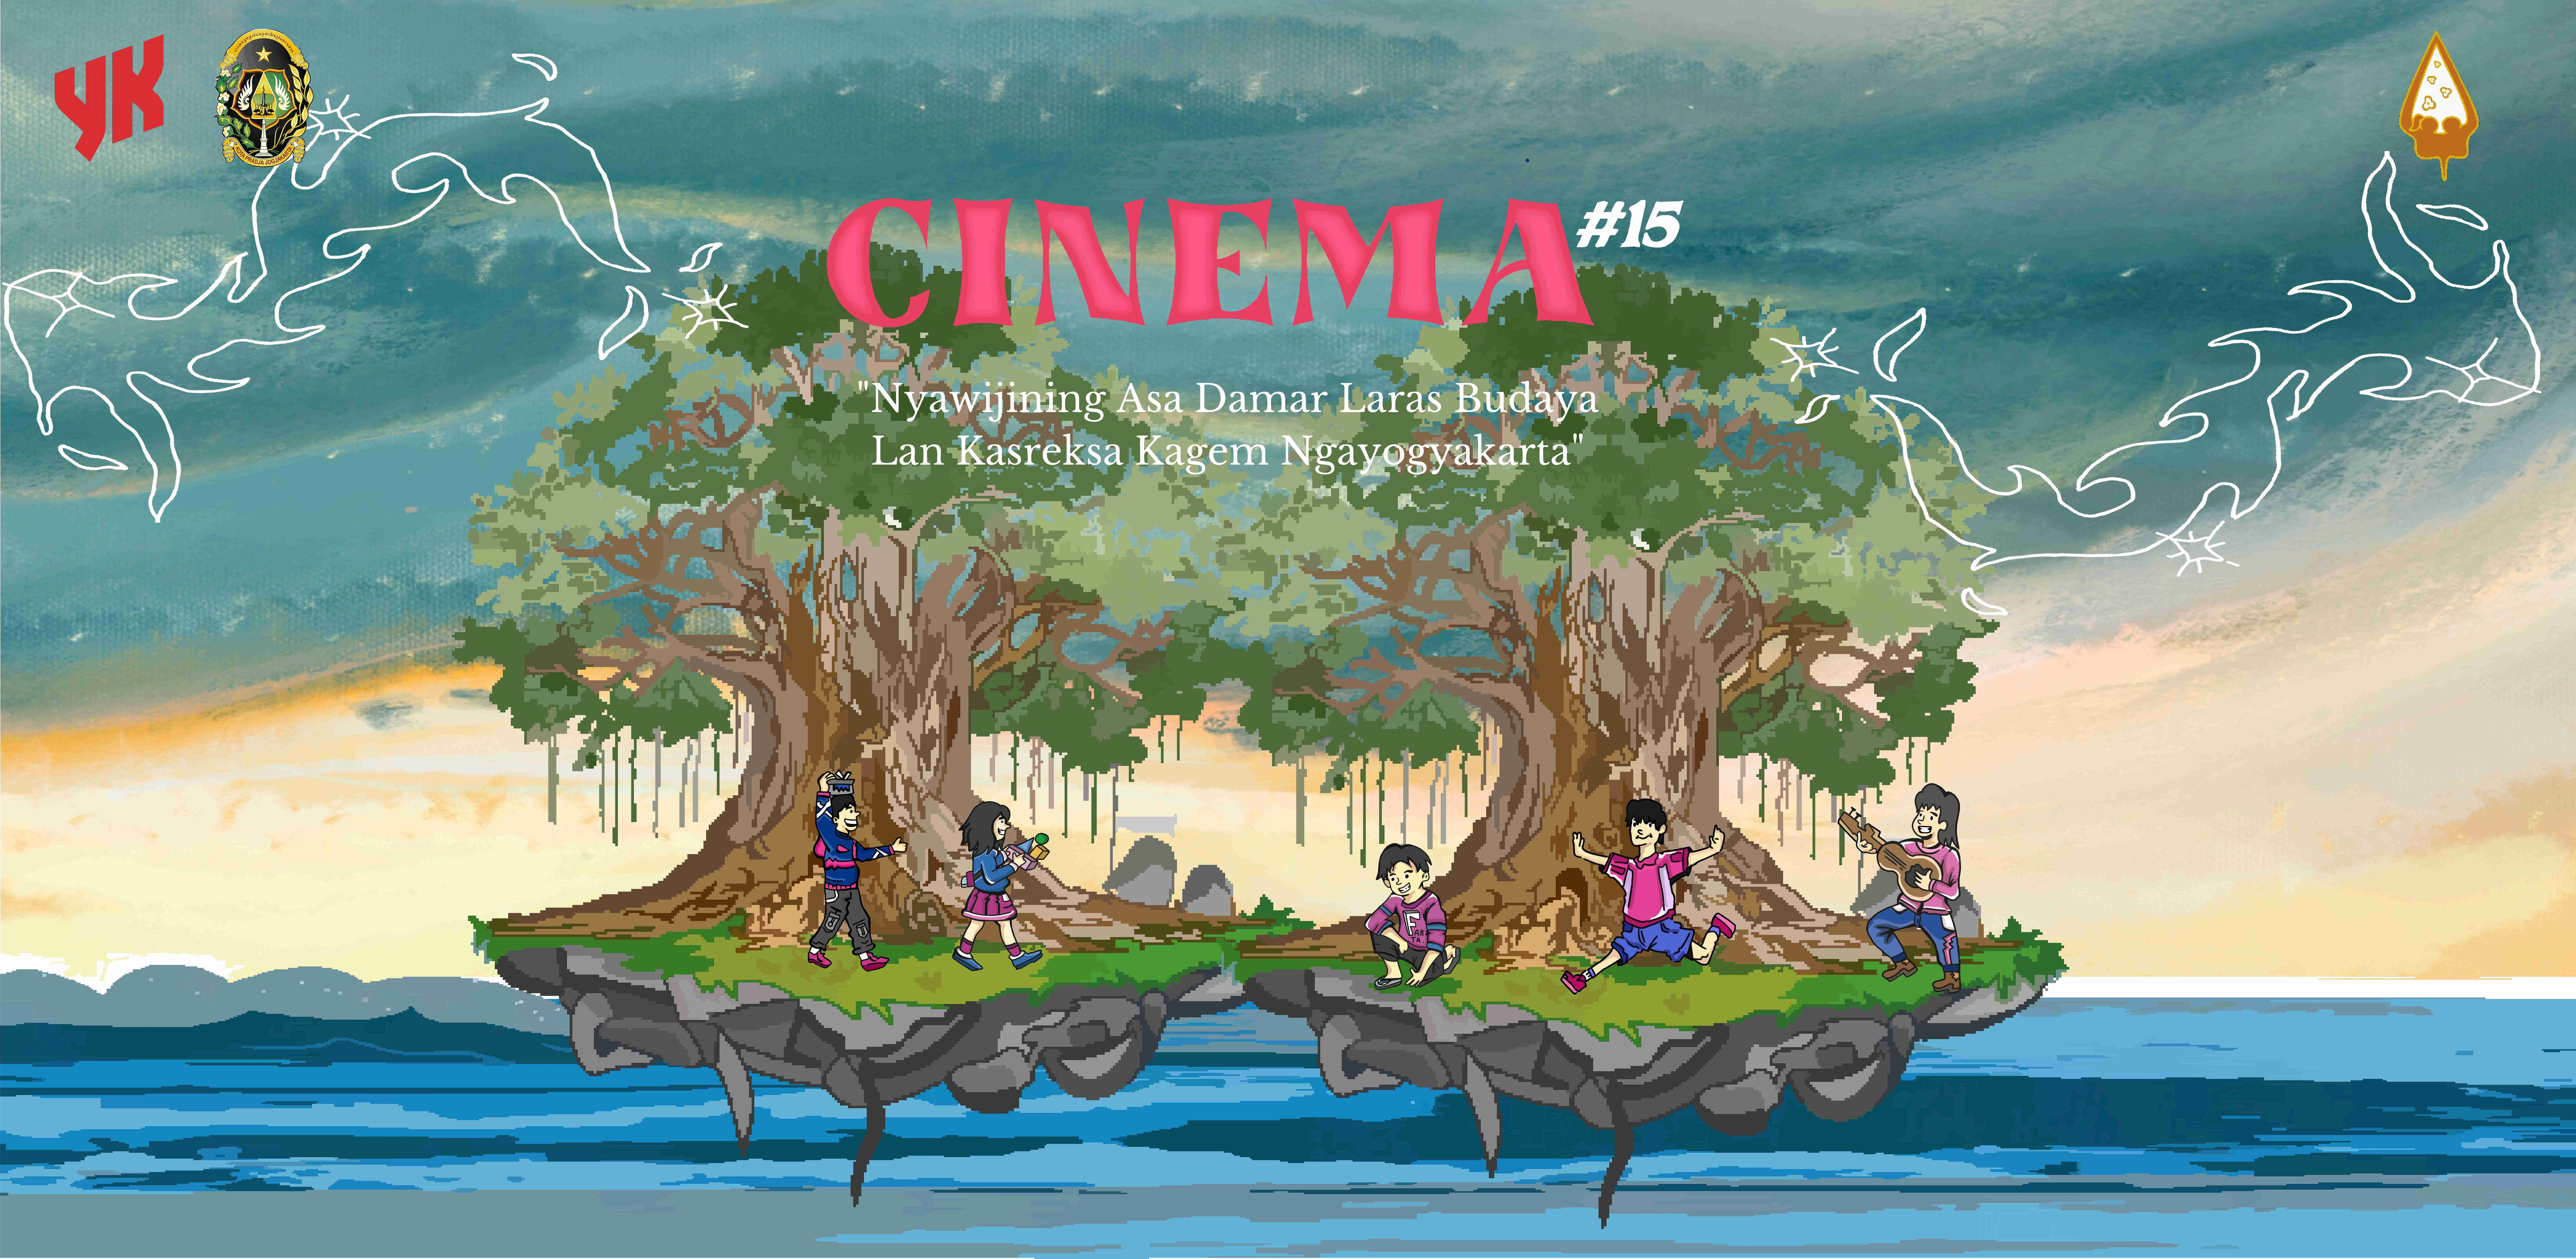 CINEMA #15 (Children Engaging and Moving in Action)